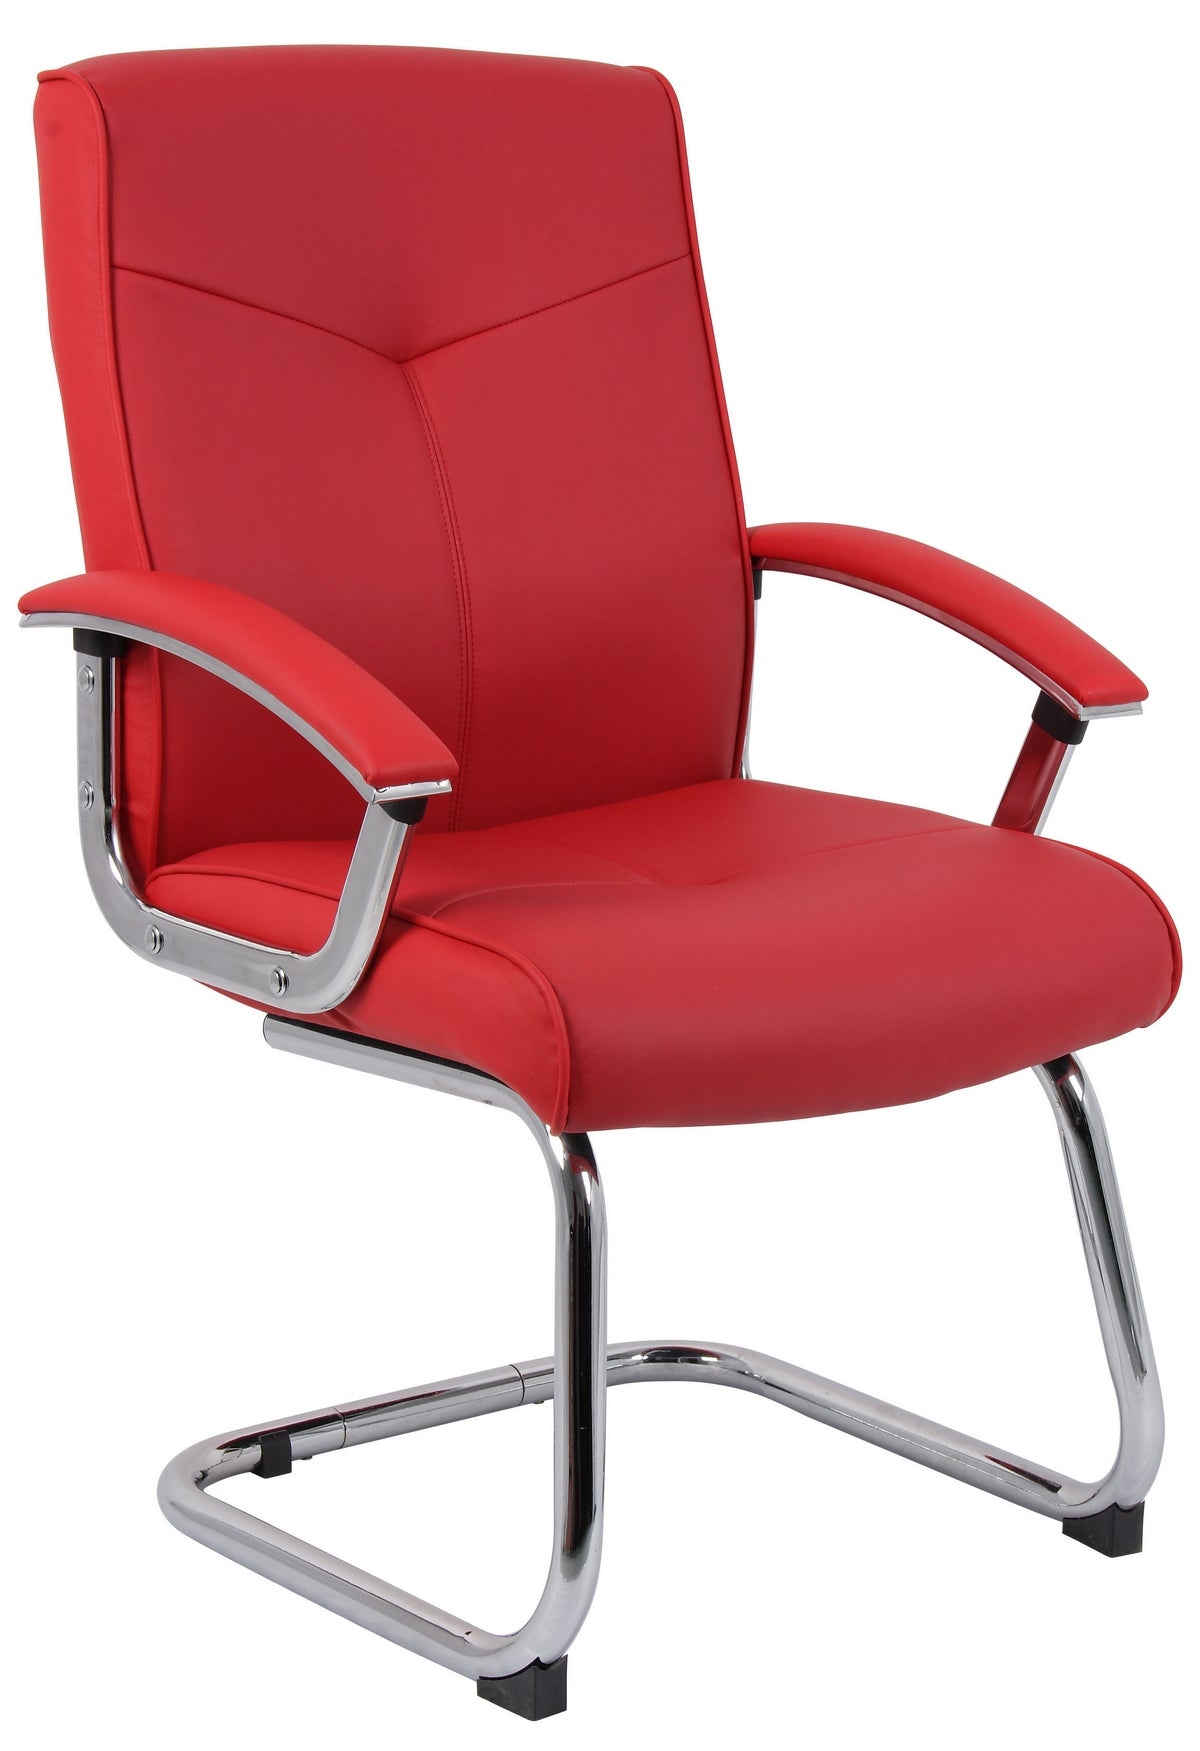 Red Leather Faced Visitor Chair - HOXTON-VISITOR Near Me